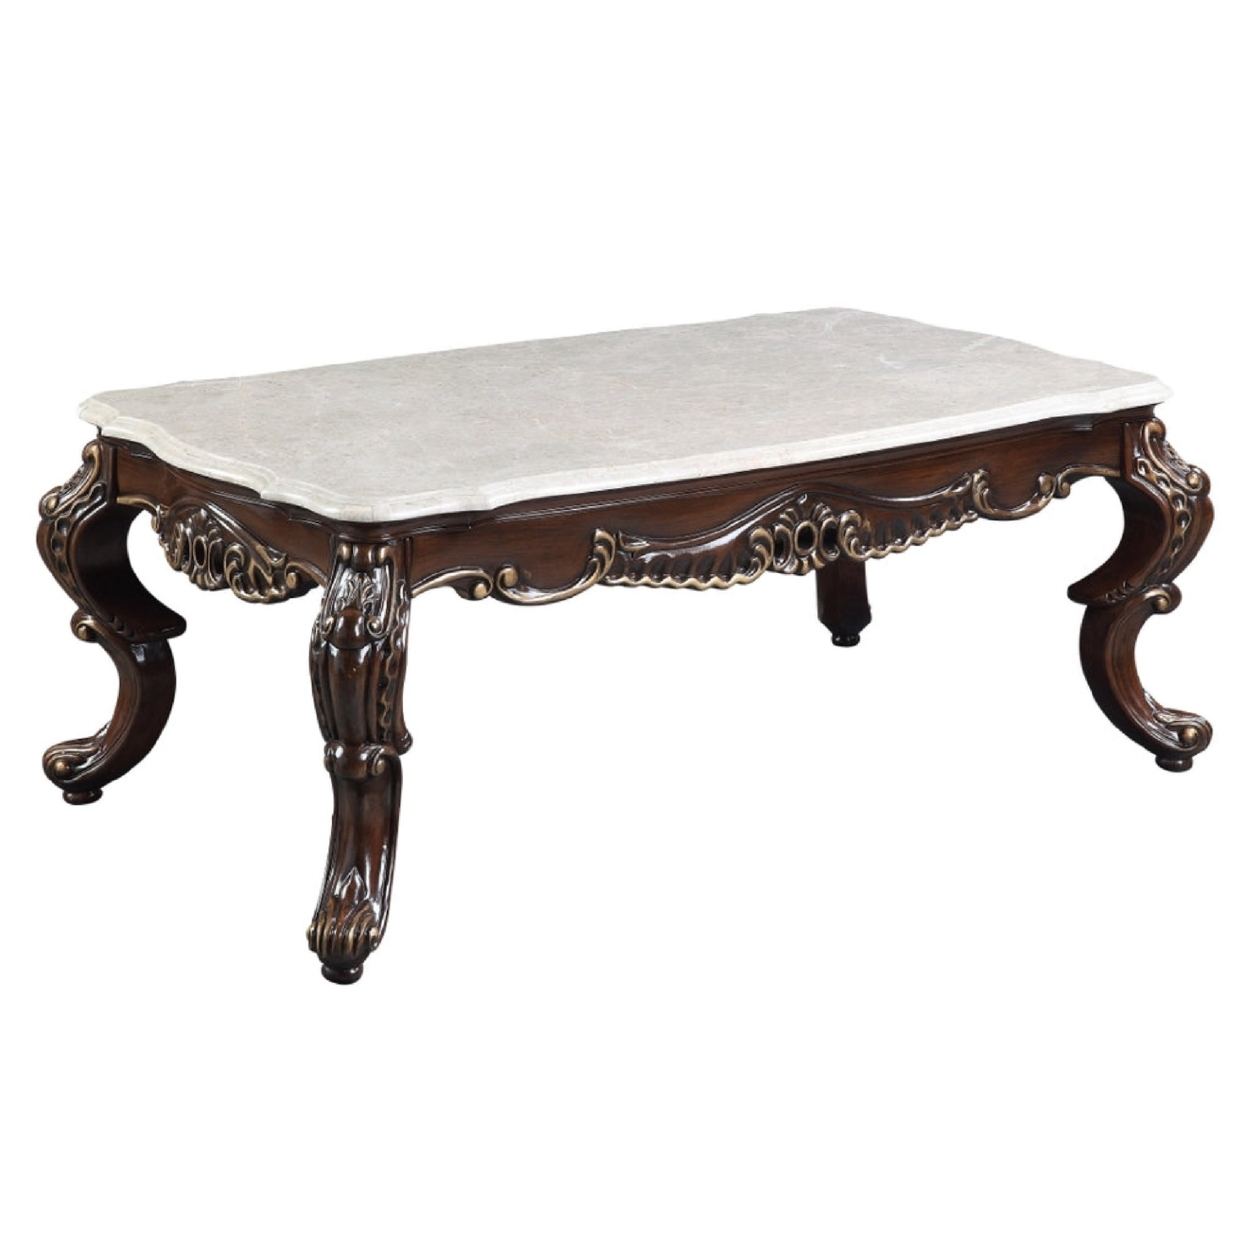 Ben 52 Inch Marble Coffee Table, Scrolled Details, Cabriole Legs, Brown- Saltoro Sherpi